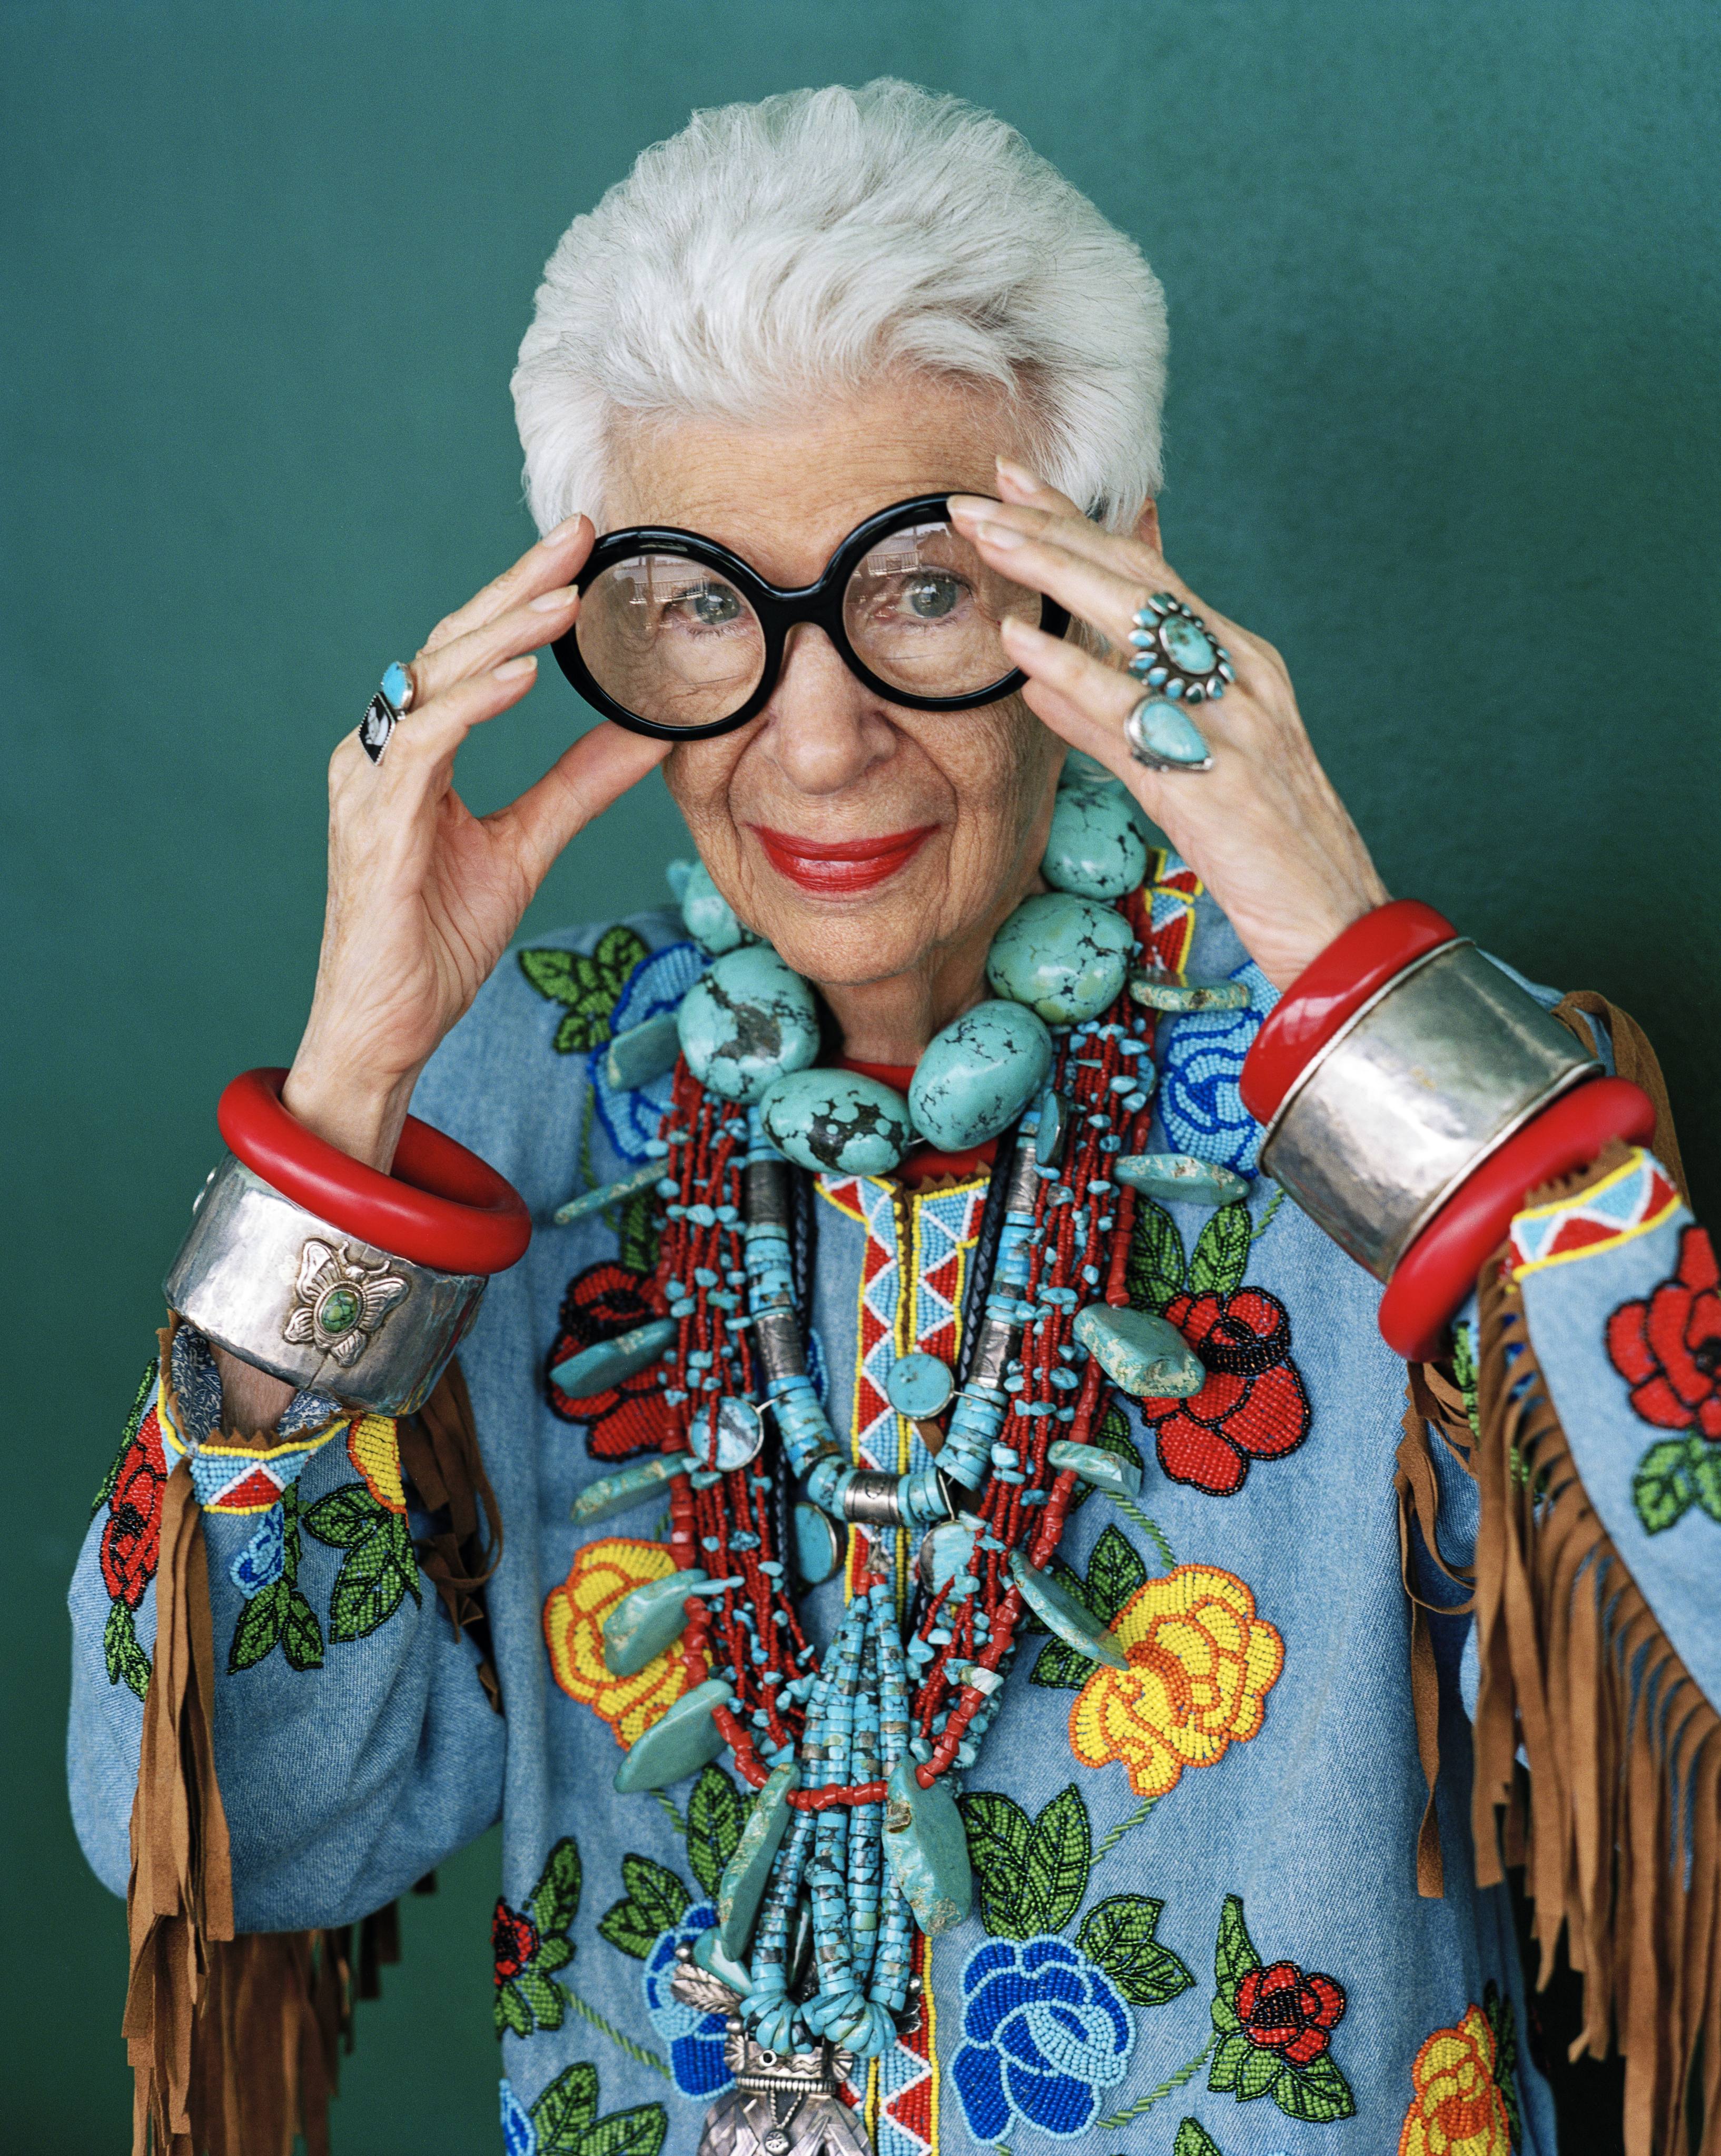 Iris Apfel, the 97-Year-Old Fashion Icon, Signs With Modeling Agency IMG